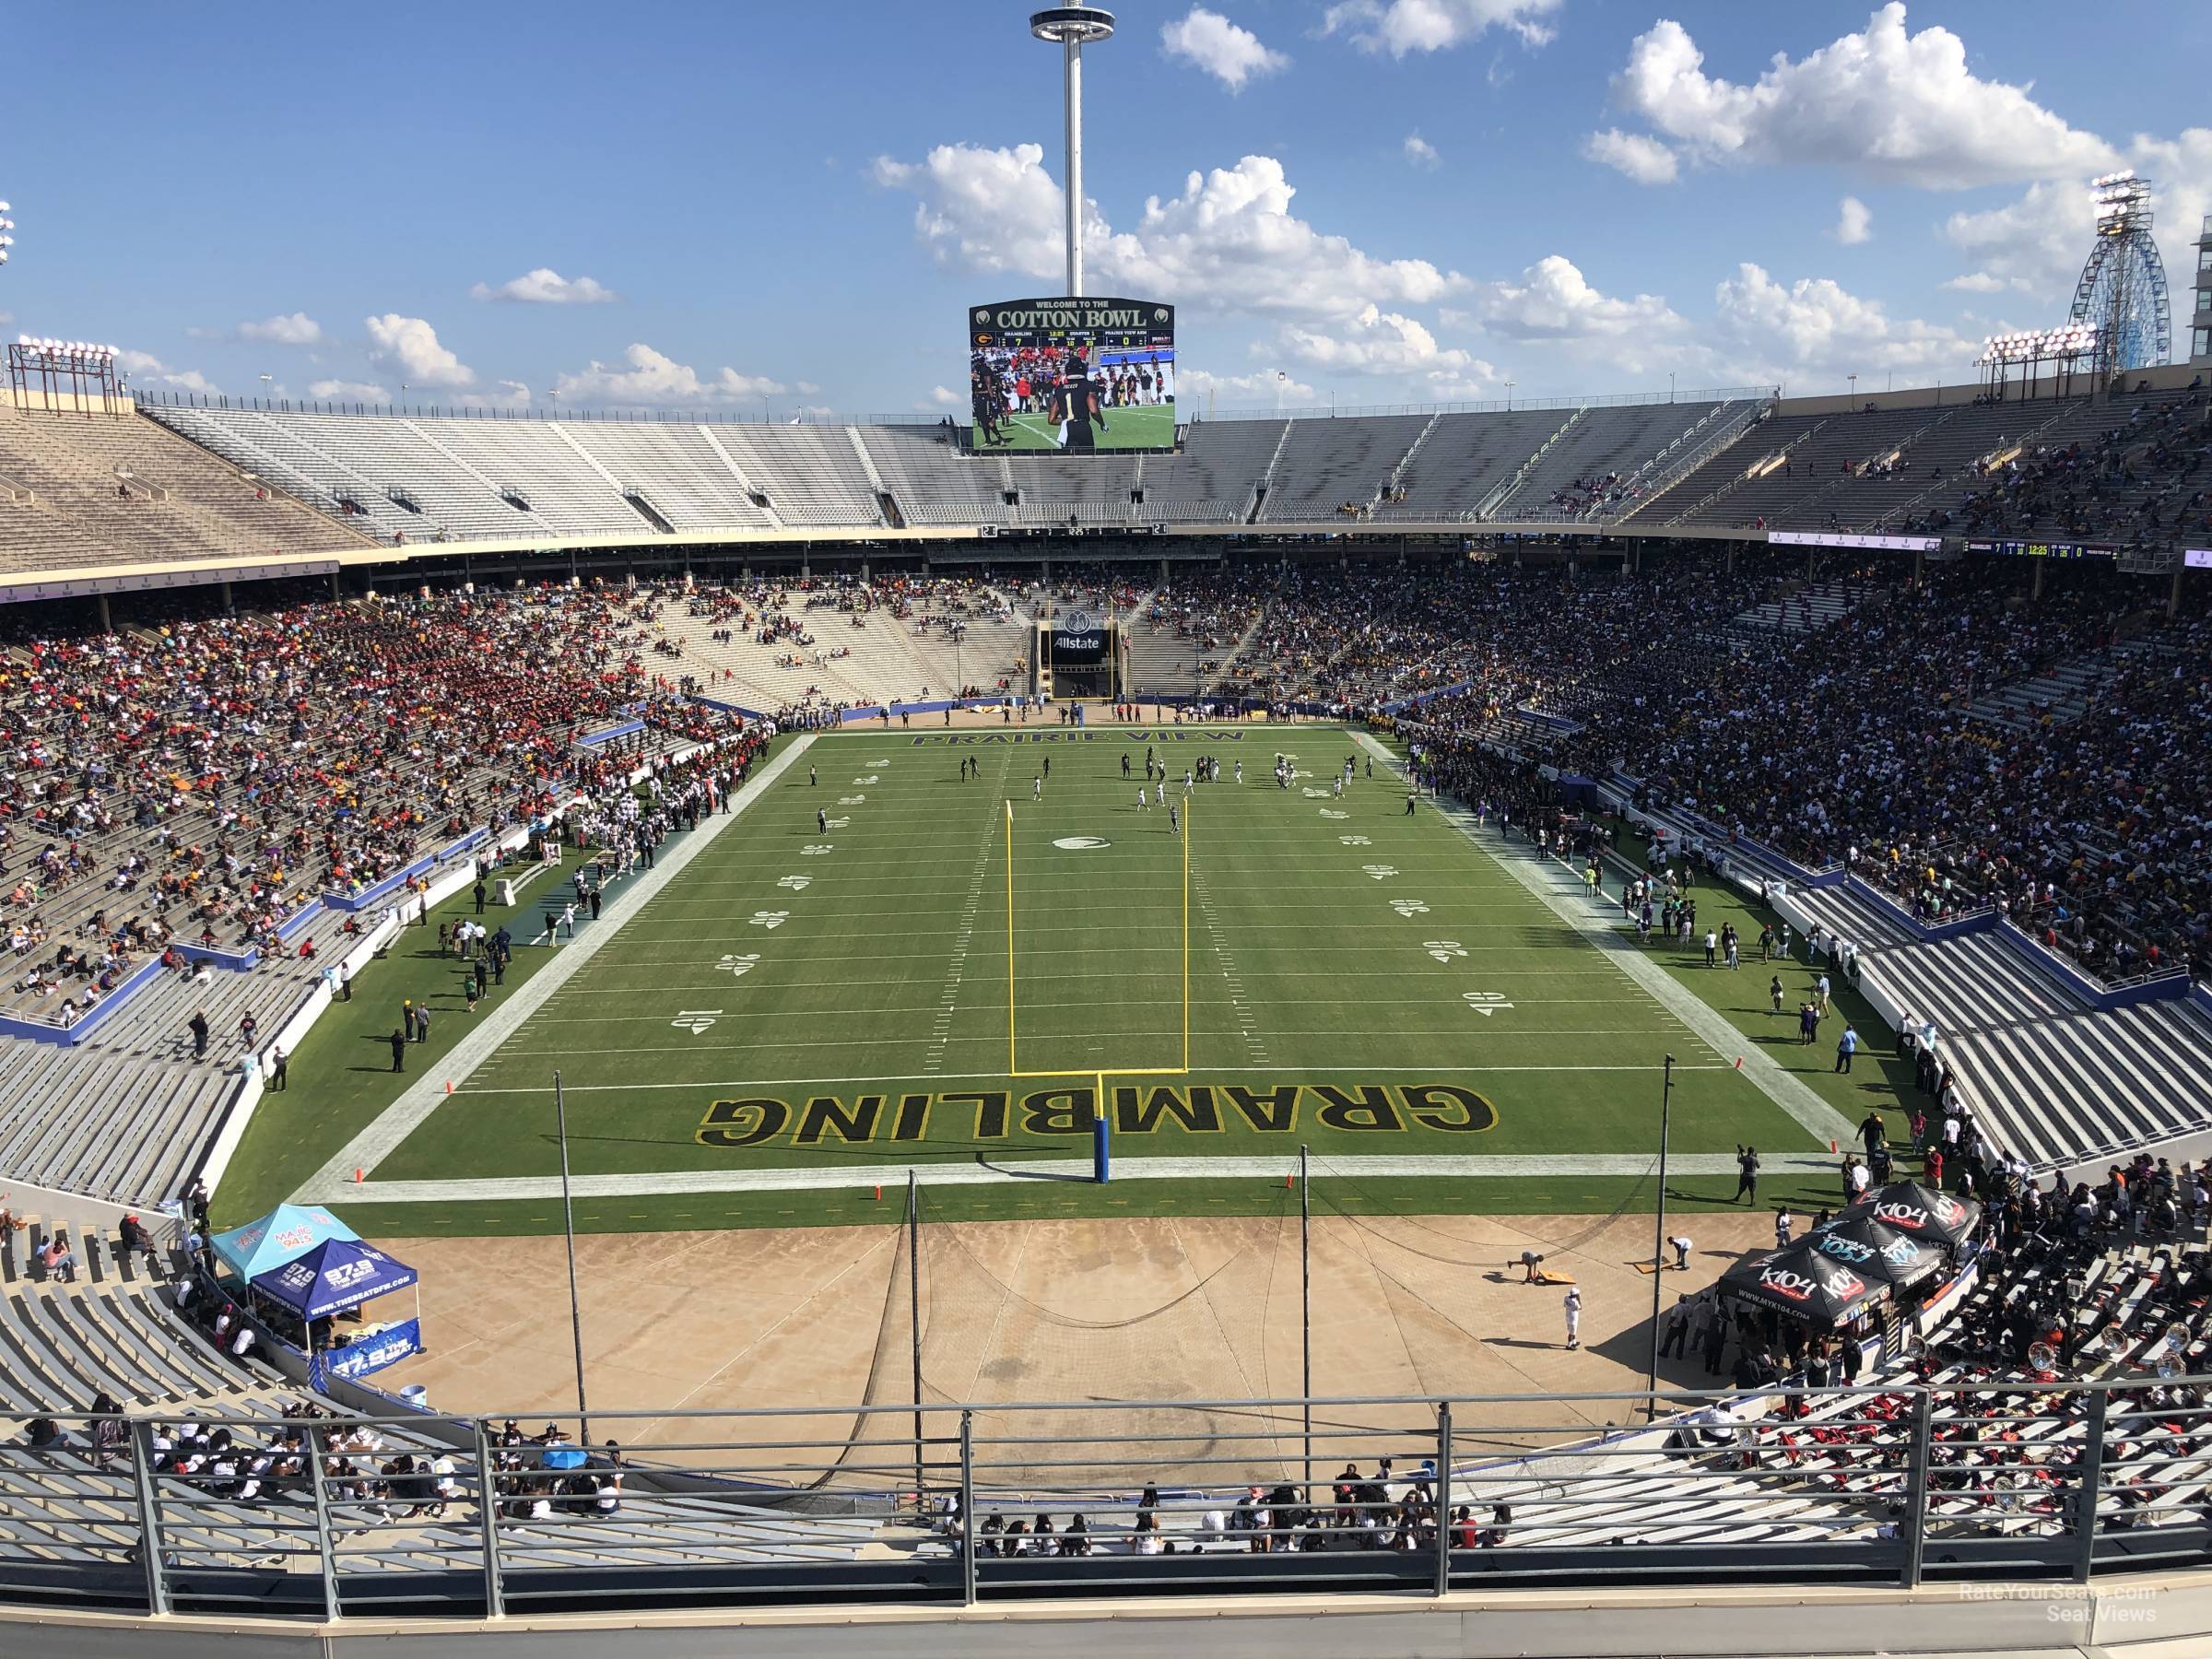 section 117, row 8 seat view  - cotton bowl